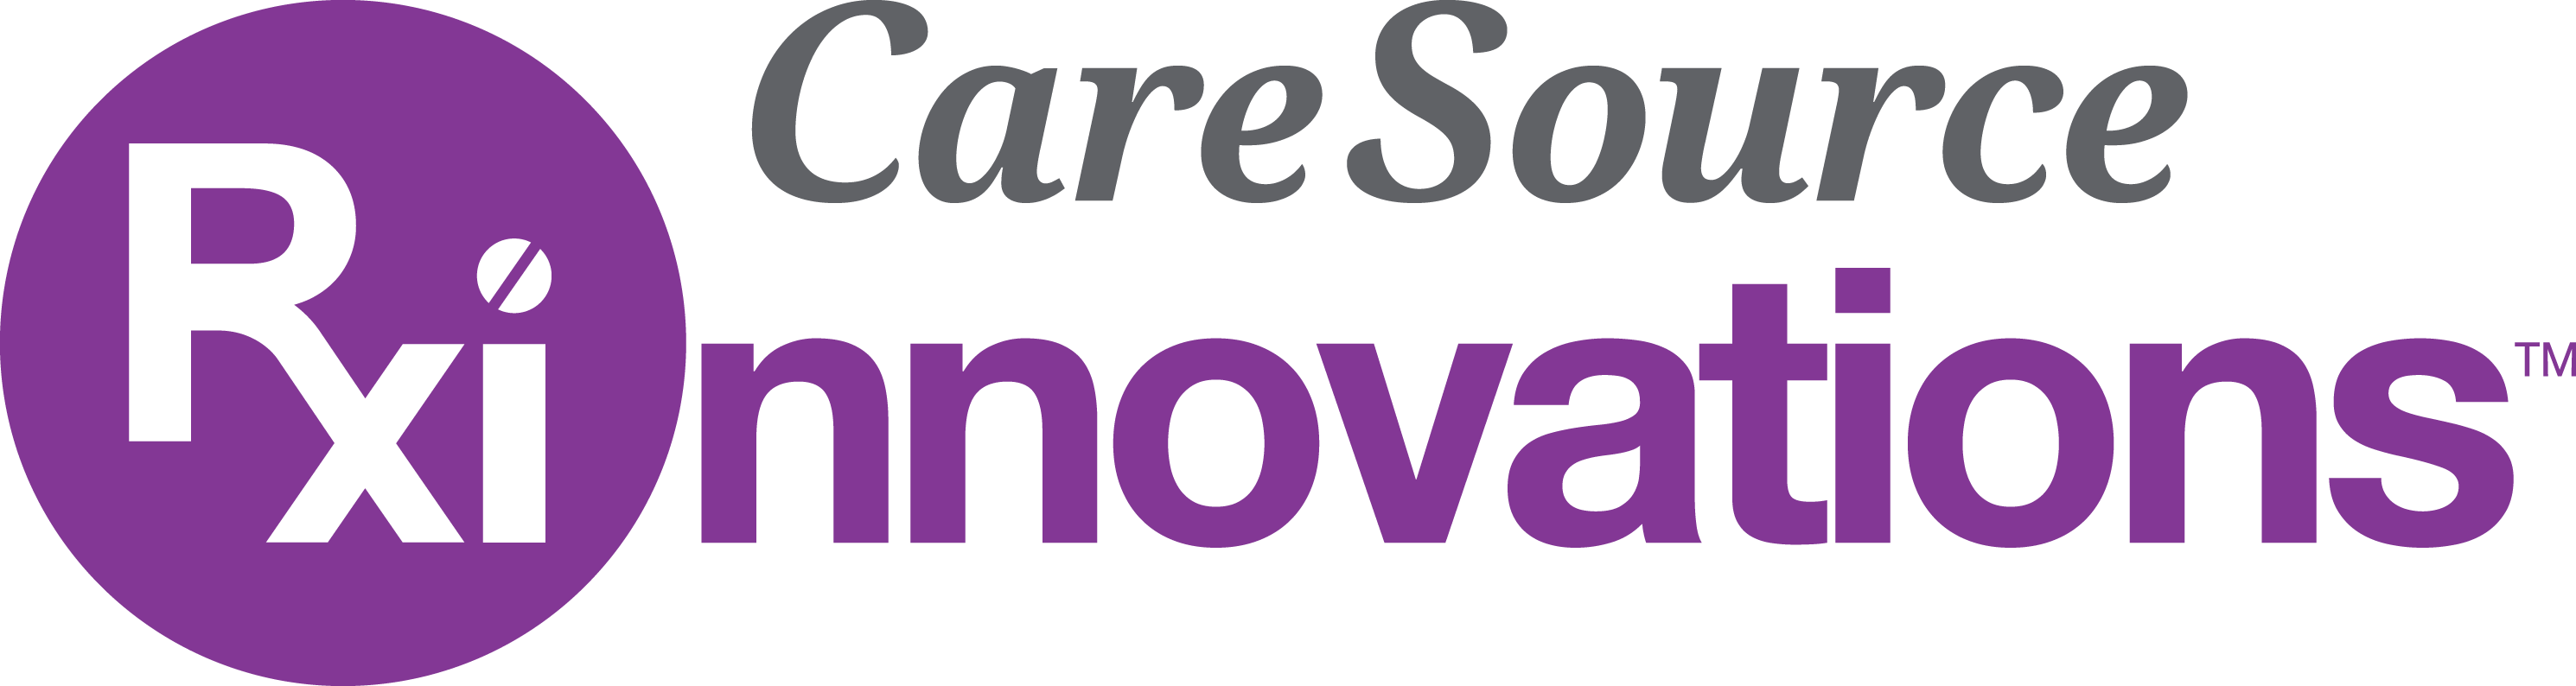 Promedica laboratories caresource process improvement and change project in healthcare